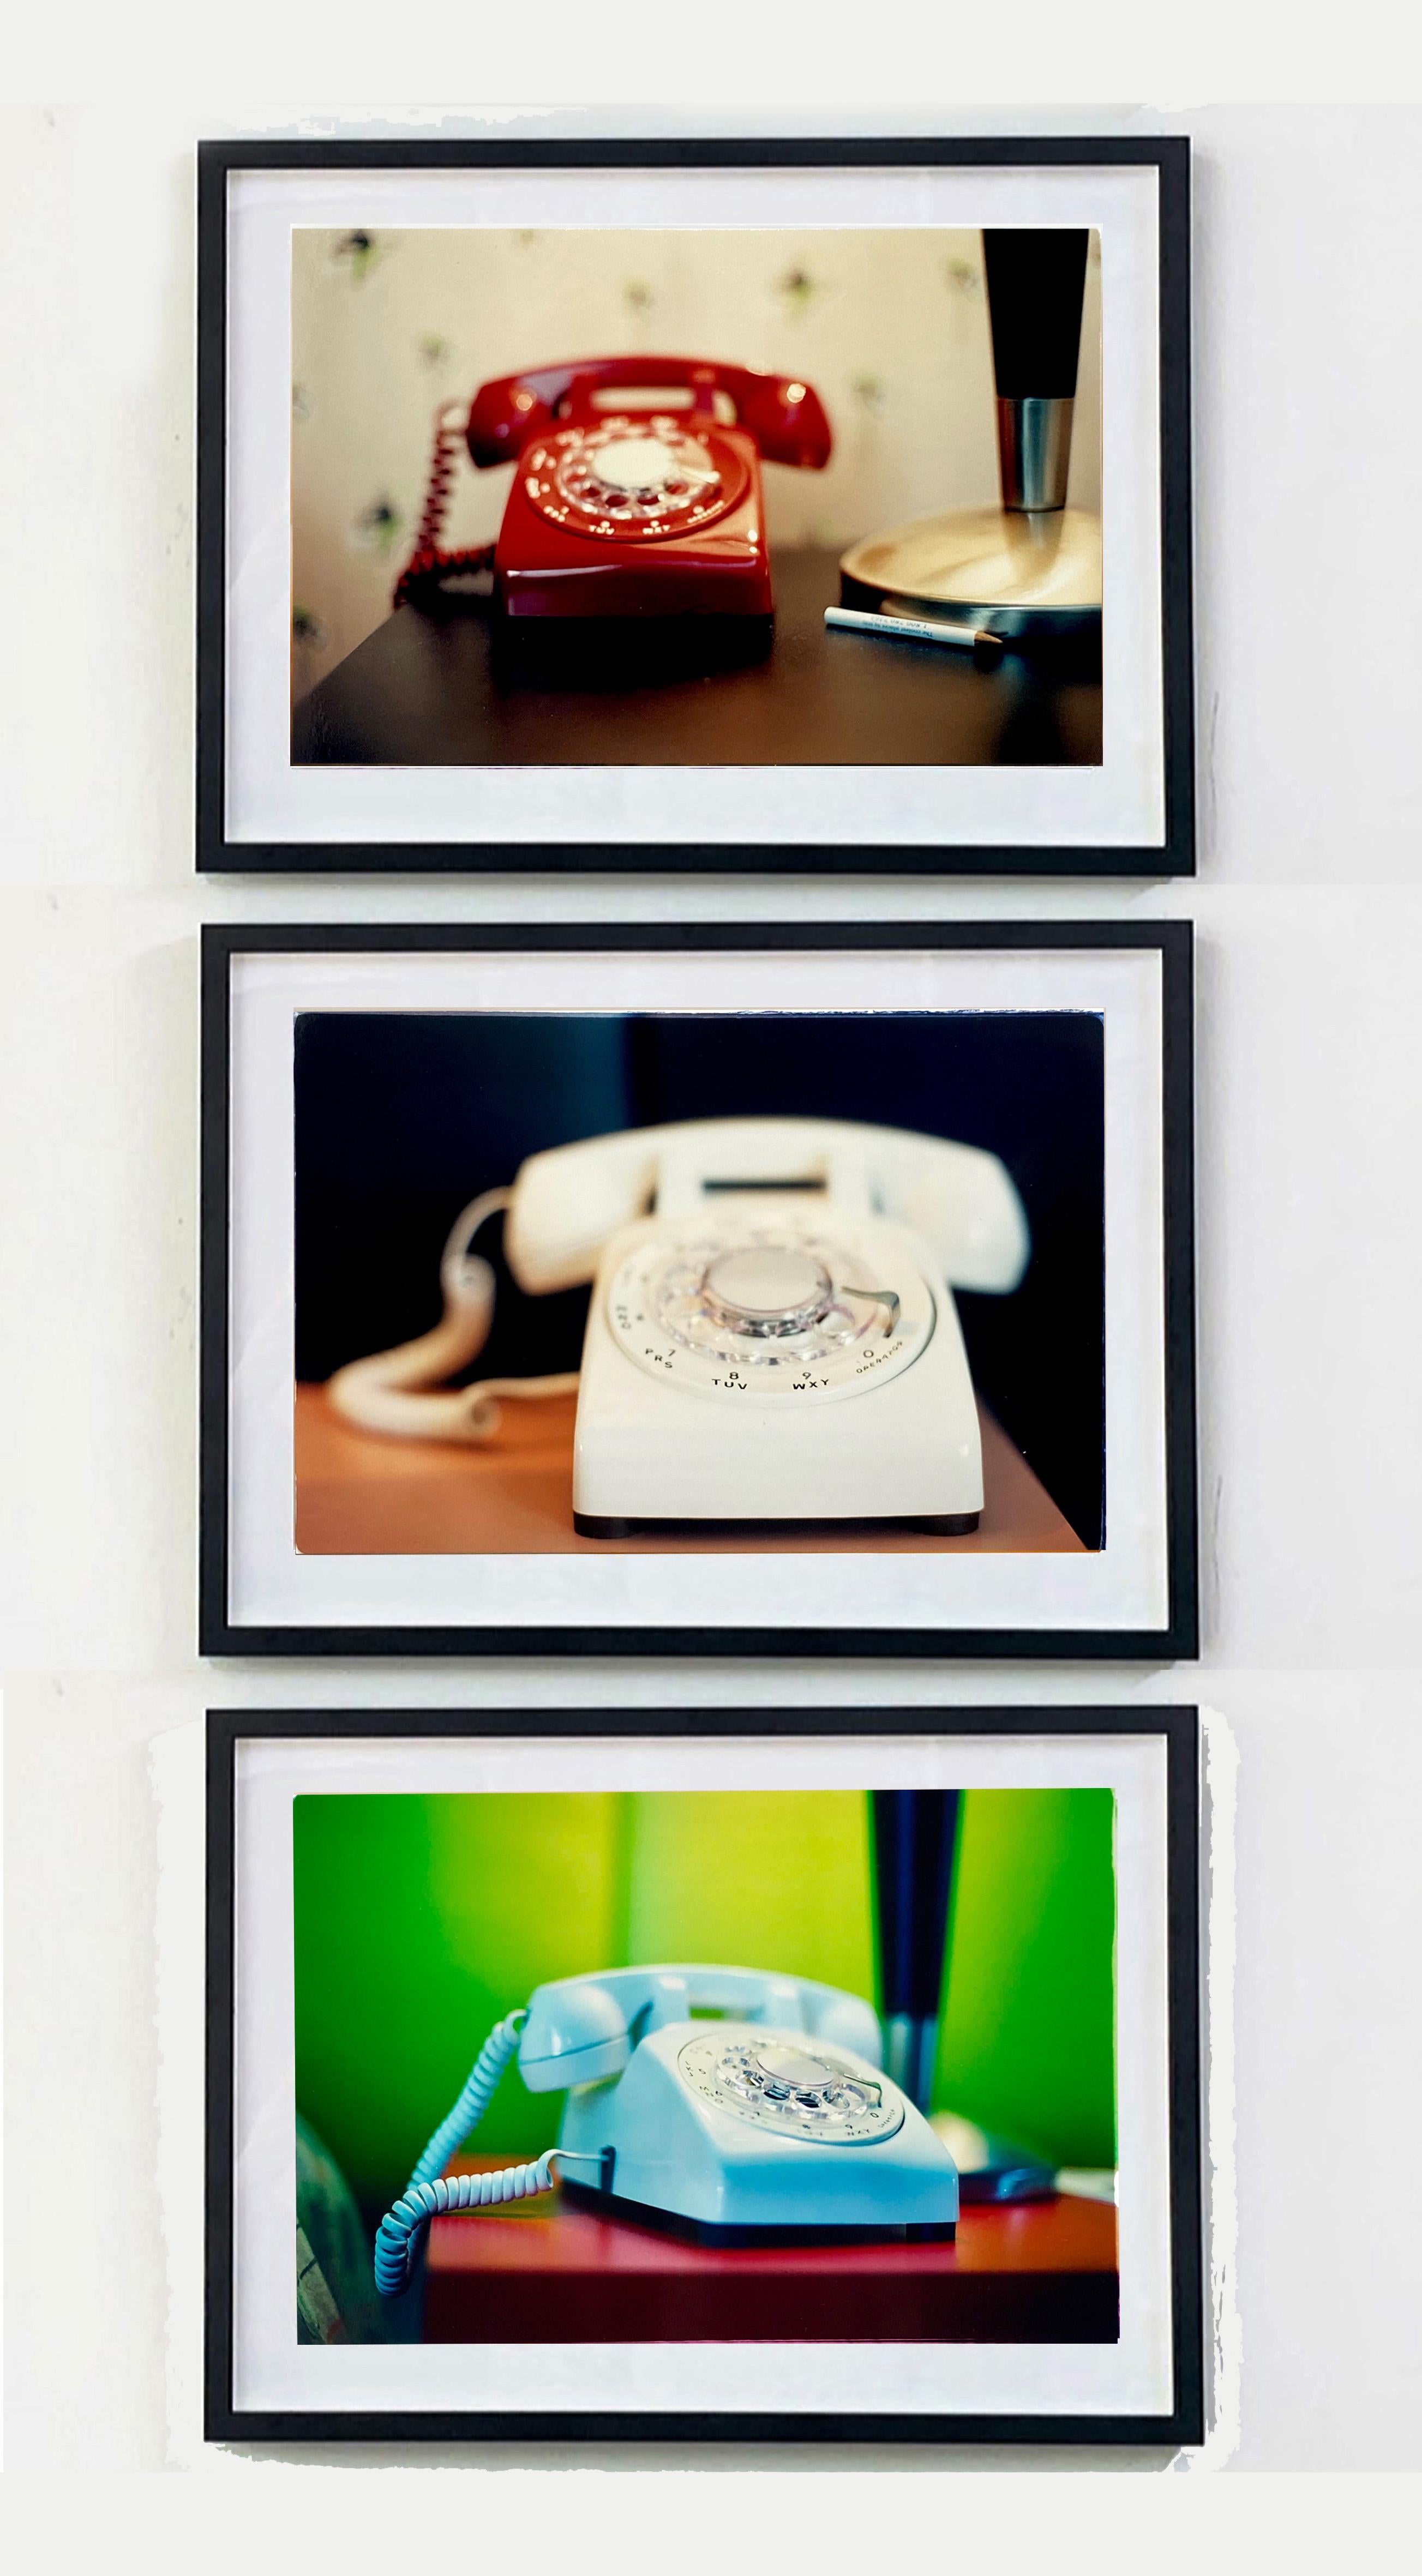 'Telephone VII' part of Richard Heeps 'Dream in Colour' Series. 
This cool Palm Springs interior photography featuring a vintage red telephone on a nightstand it has a dreamy nostalgic mid-century vibes.

This artwork is a limited edition of